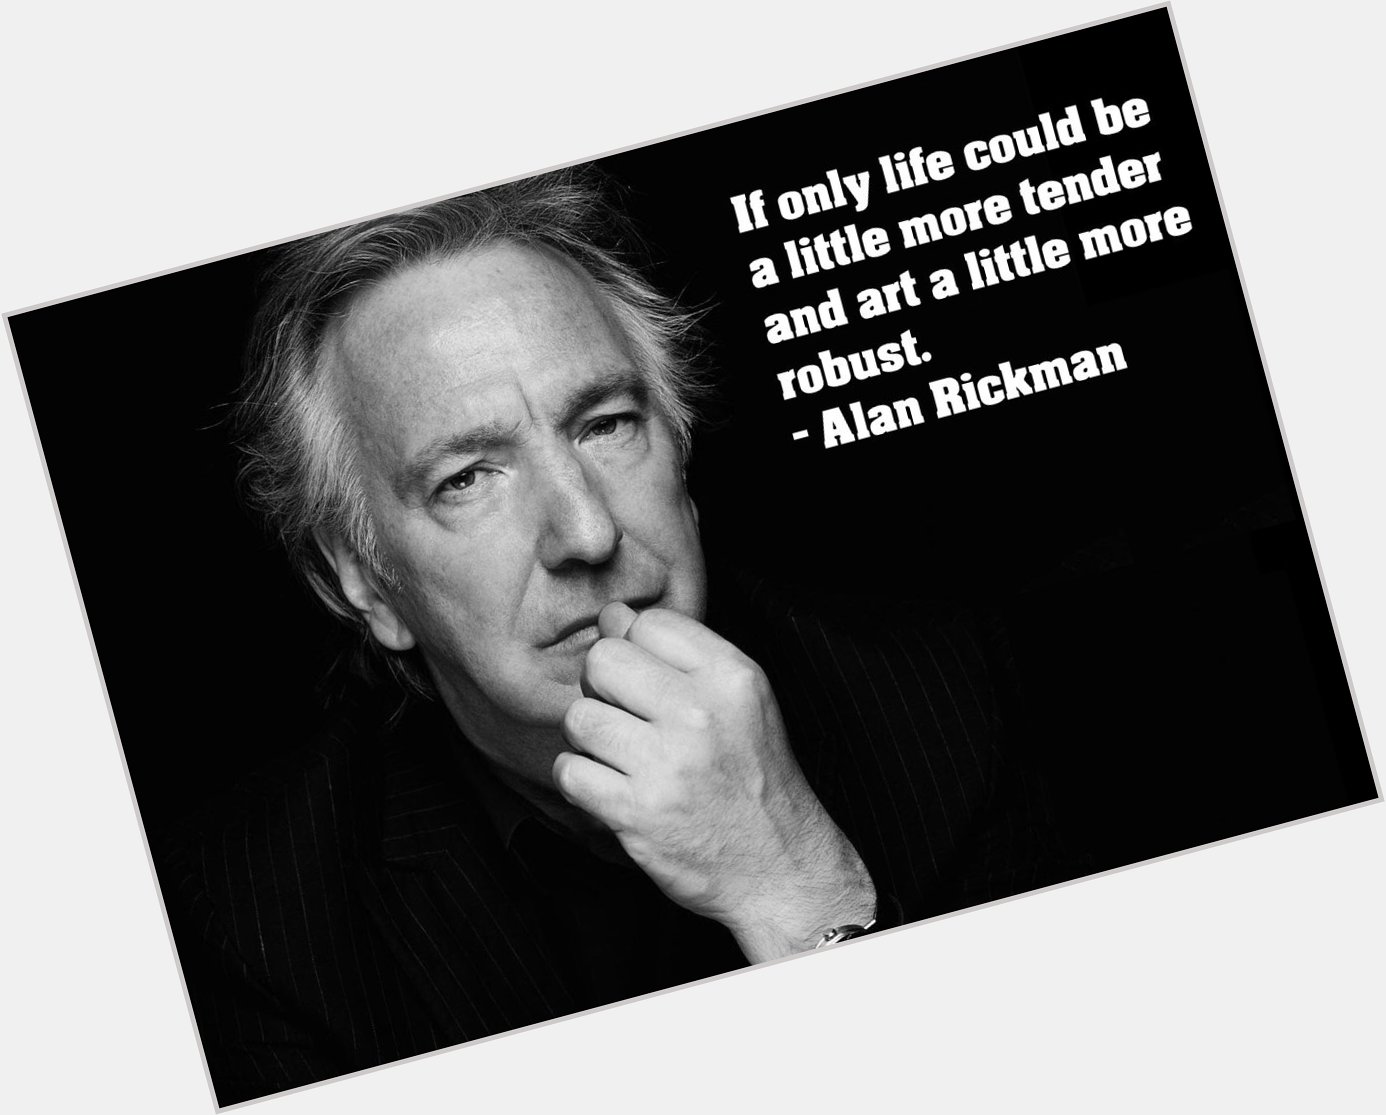 Alan Rickman was born today 1946. Happy birthday fella (still quite hard to believe he died). What a top top quote 